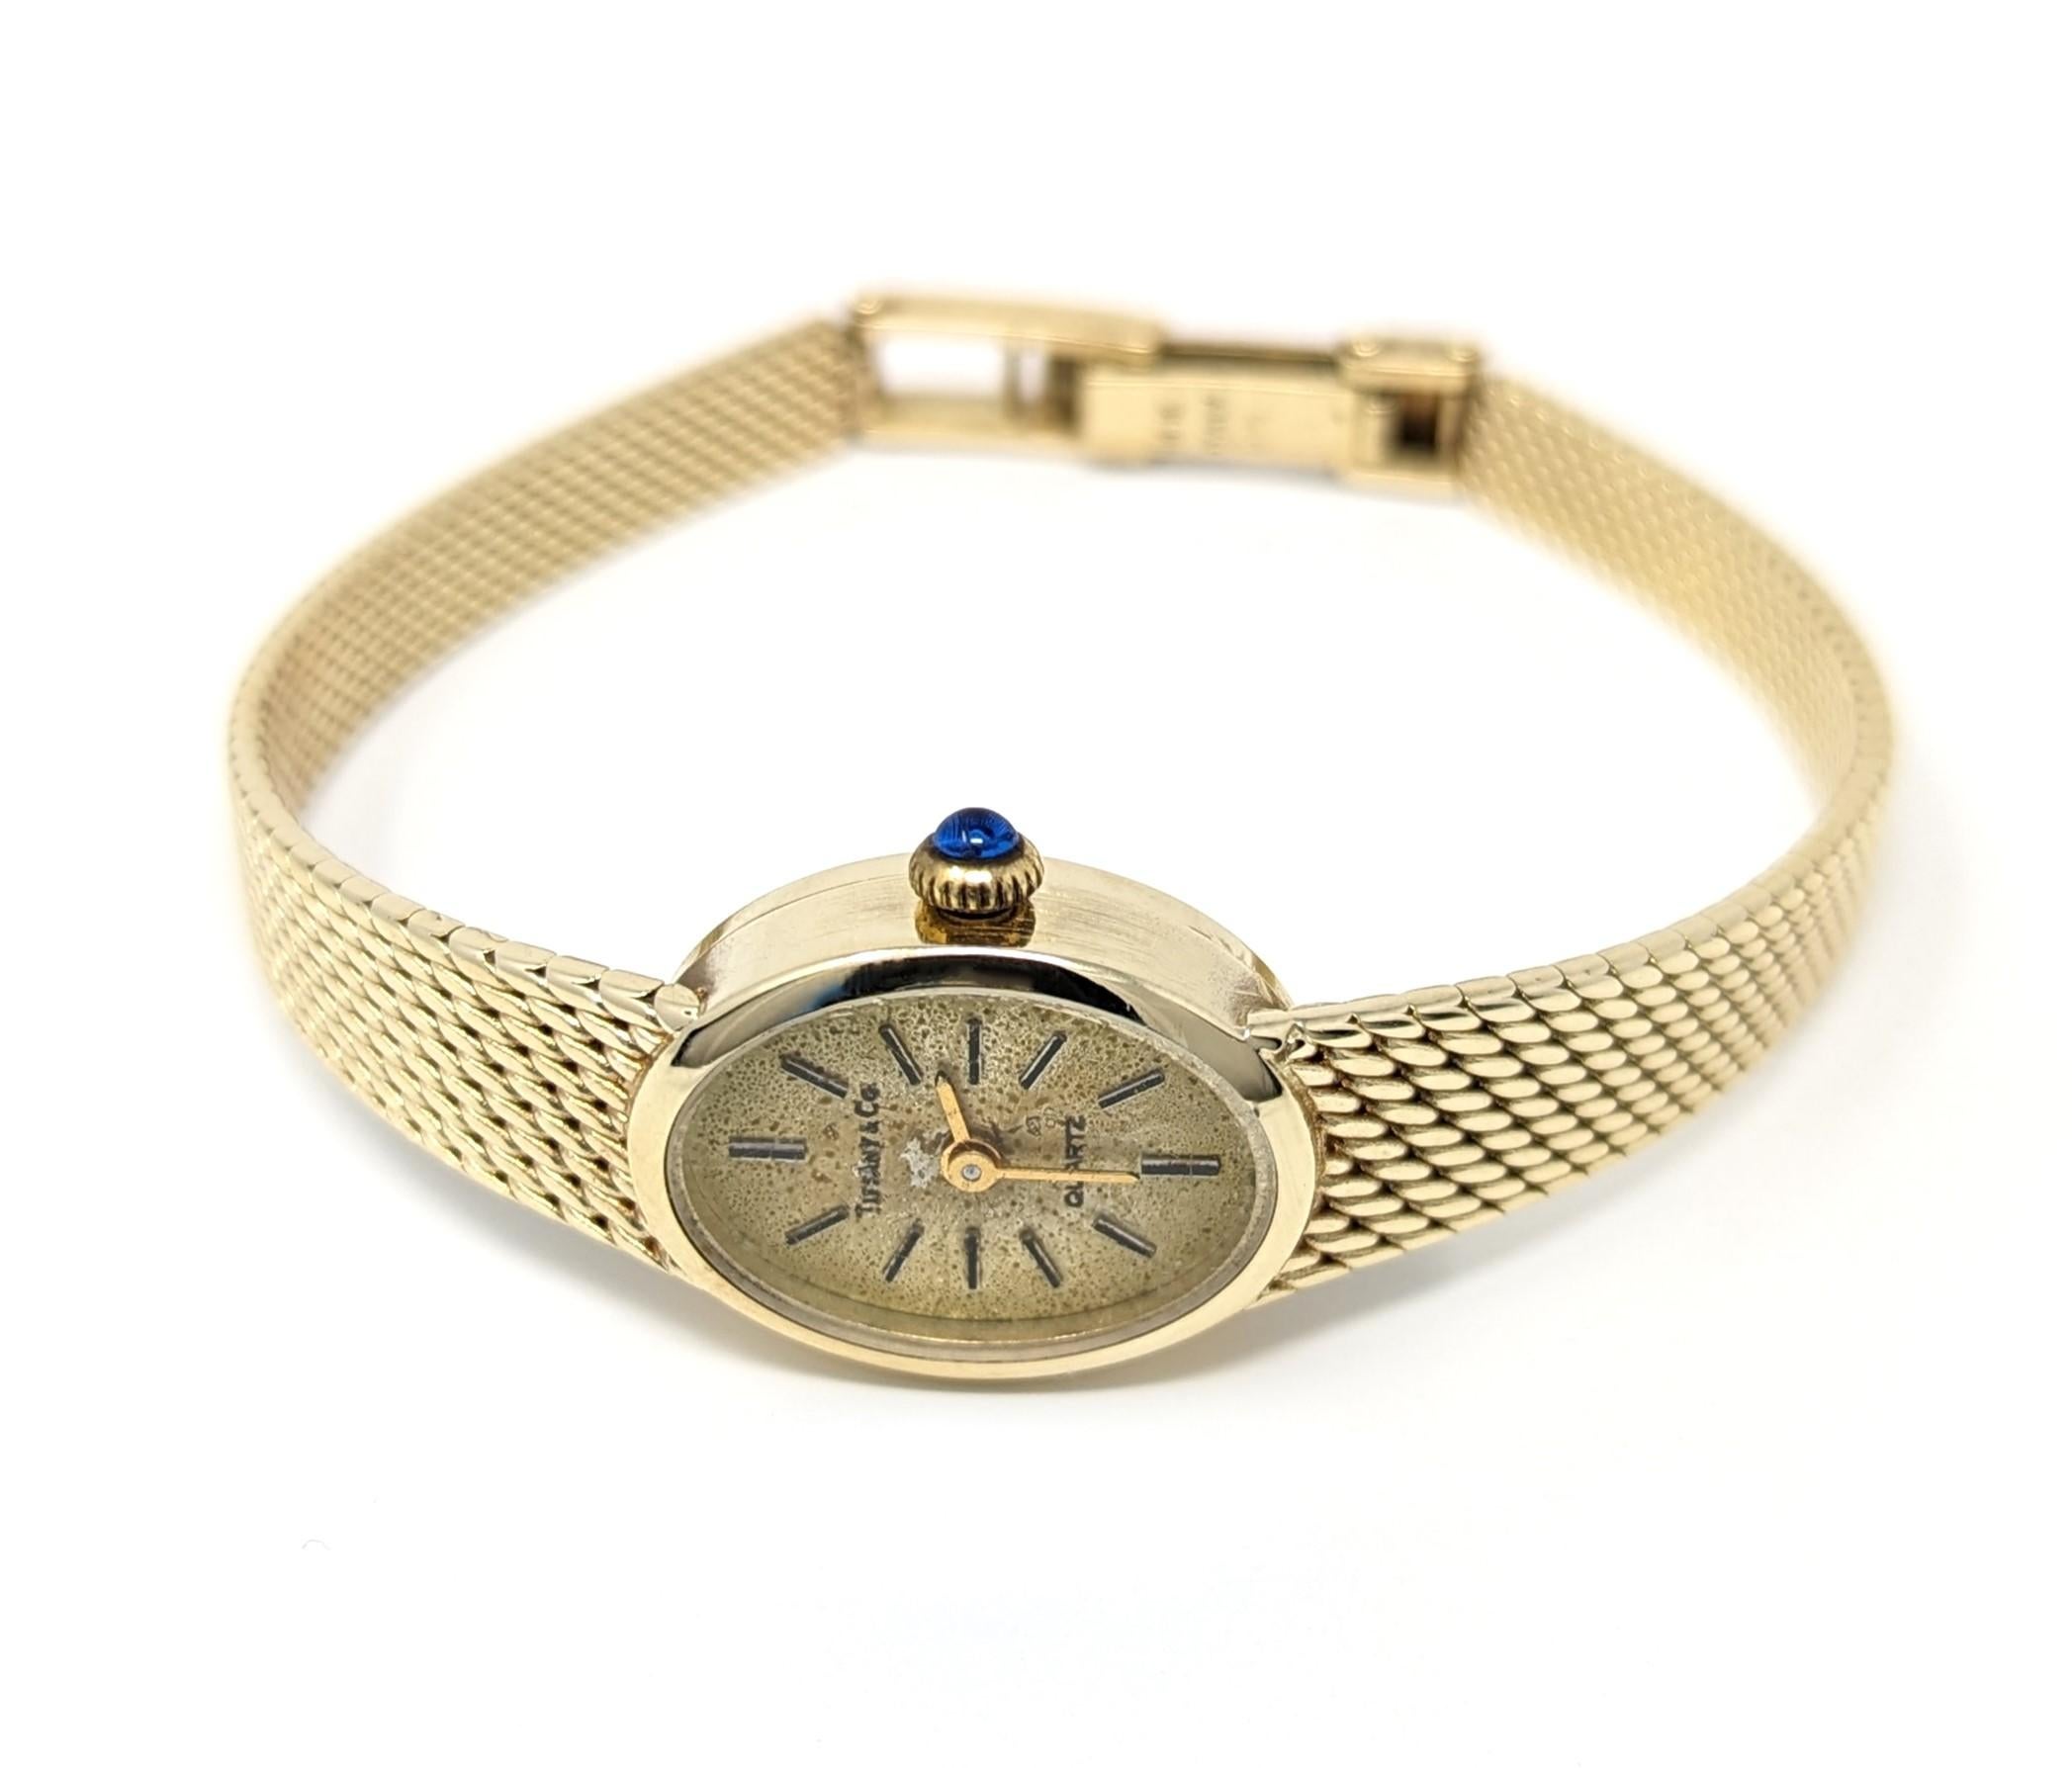 Vintage 14k Tiffany & Co. ladies watch with an elegant mesh band, created in solid 14k yellow gold with a sapphire color glass crown. This wonderful watch was presented as an award for an Avon member for 25 years of service (engraved on the back).